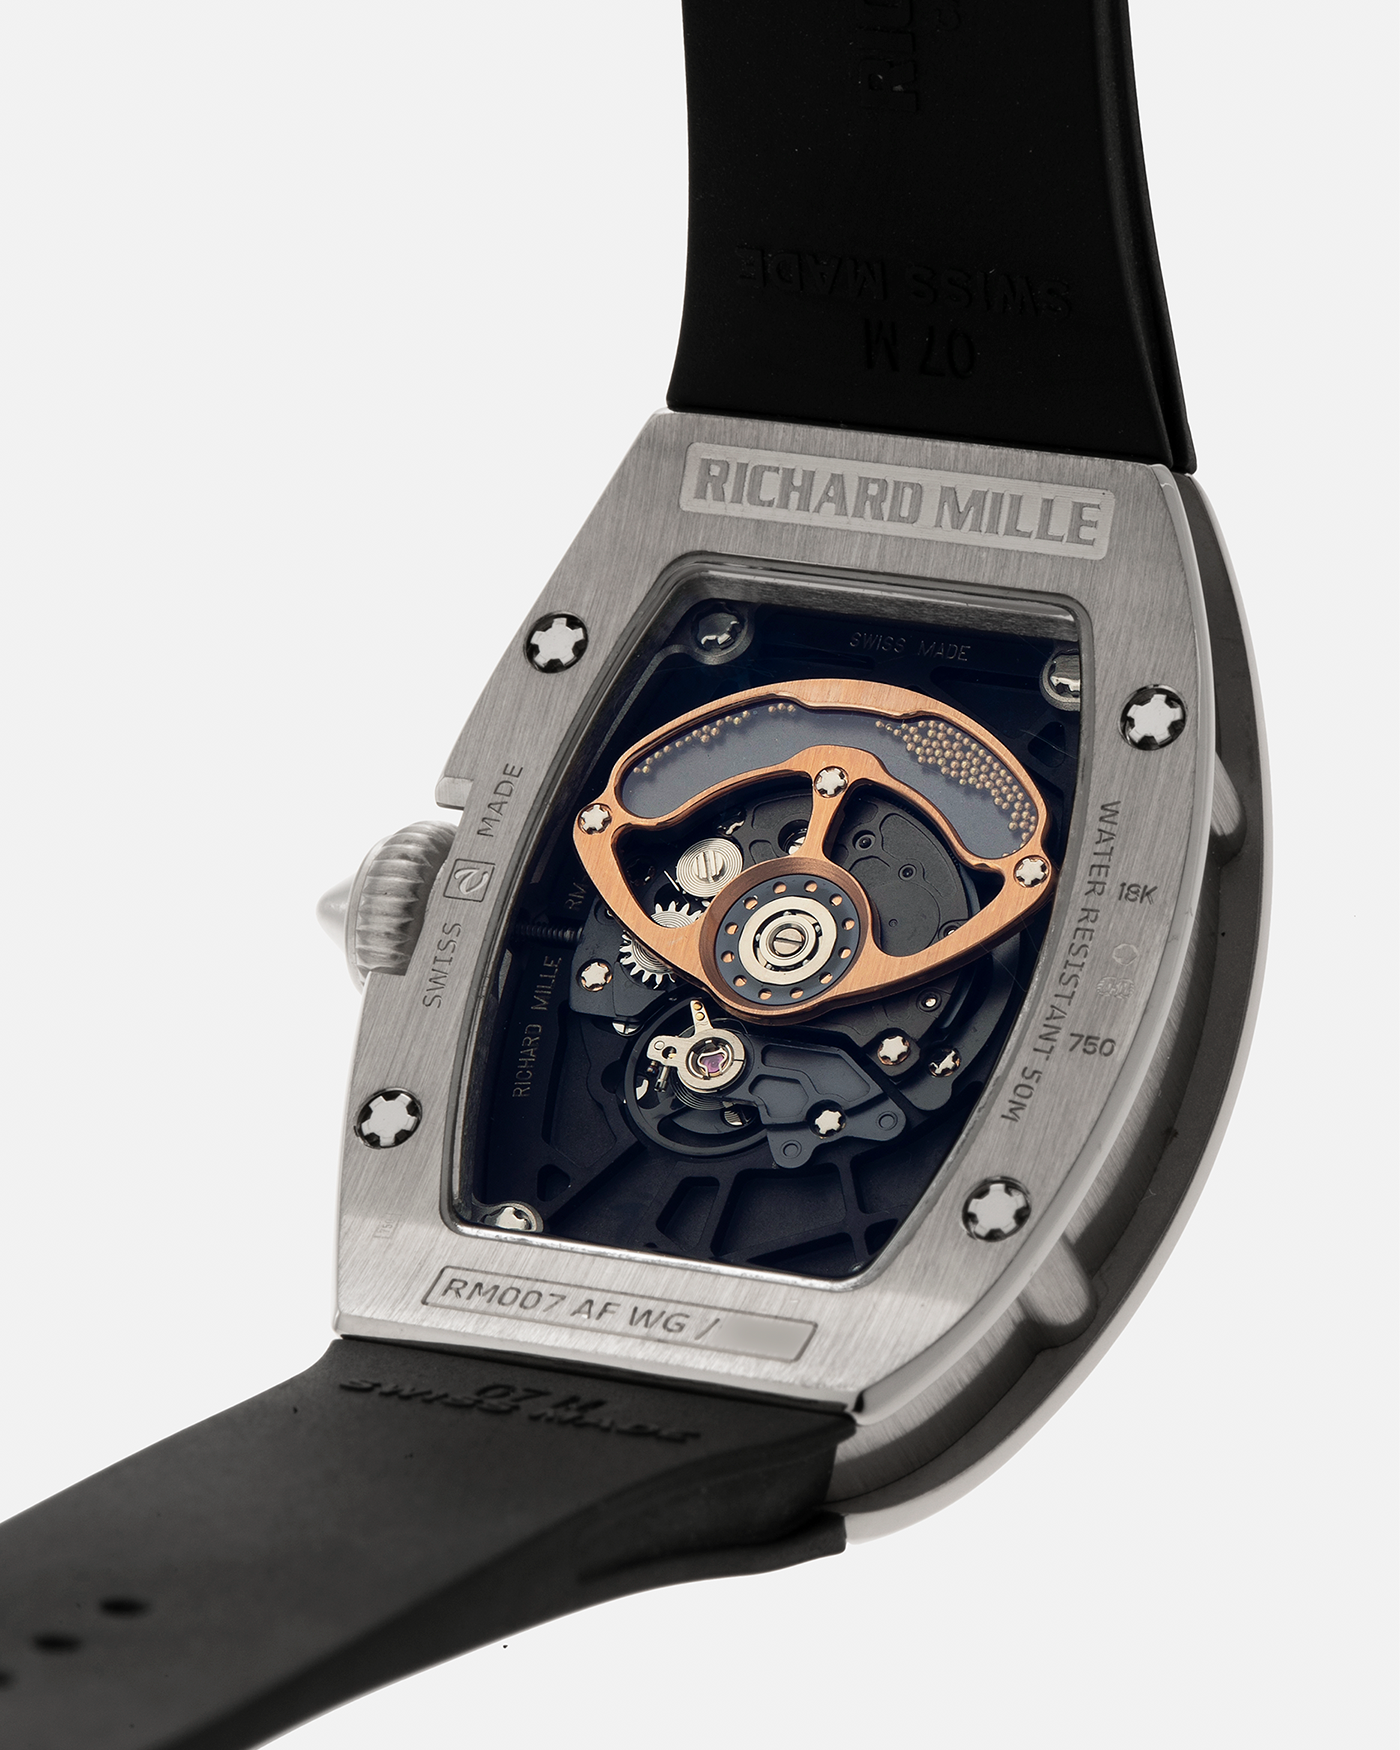 Brand: Richard Mille Year: 2000s Model: RM007 ‘Orange Lip’ Case Material: 18-carat White Gold Case, Diamond-Set Hour Markers Movement: Richard Mille Cal. RM007, Self-Winding Case Dimensions: 31mm x 45mm  Strap: Richard Mille Black Rubber Strap with Signed Titanium Deployant Clasp